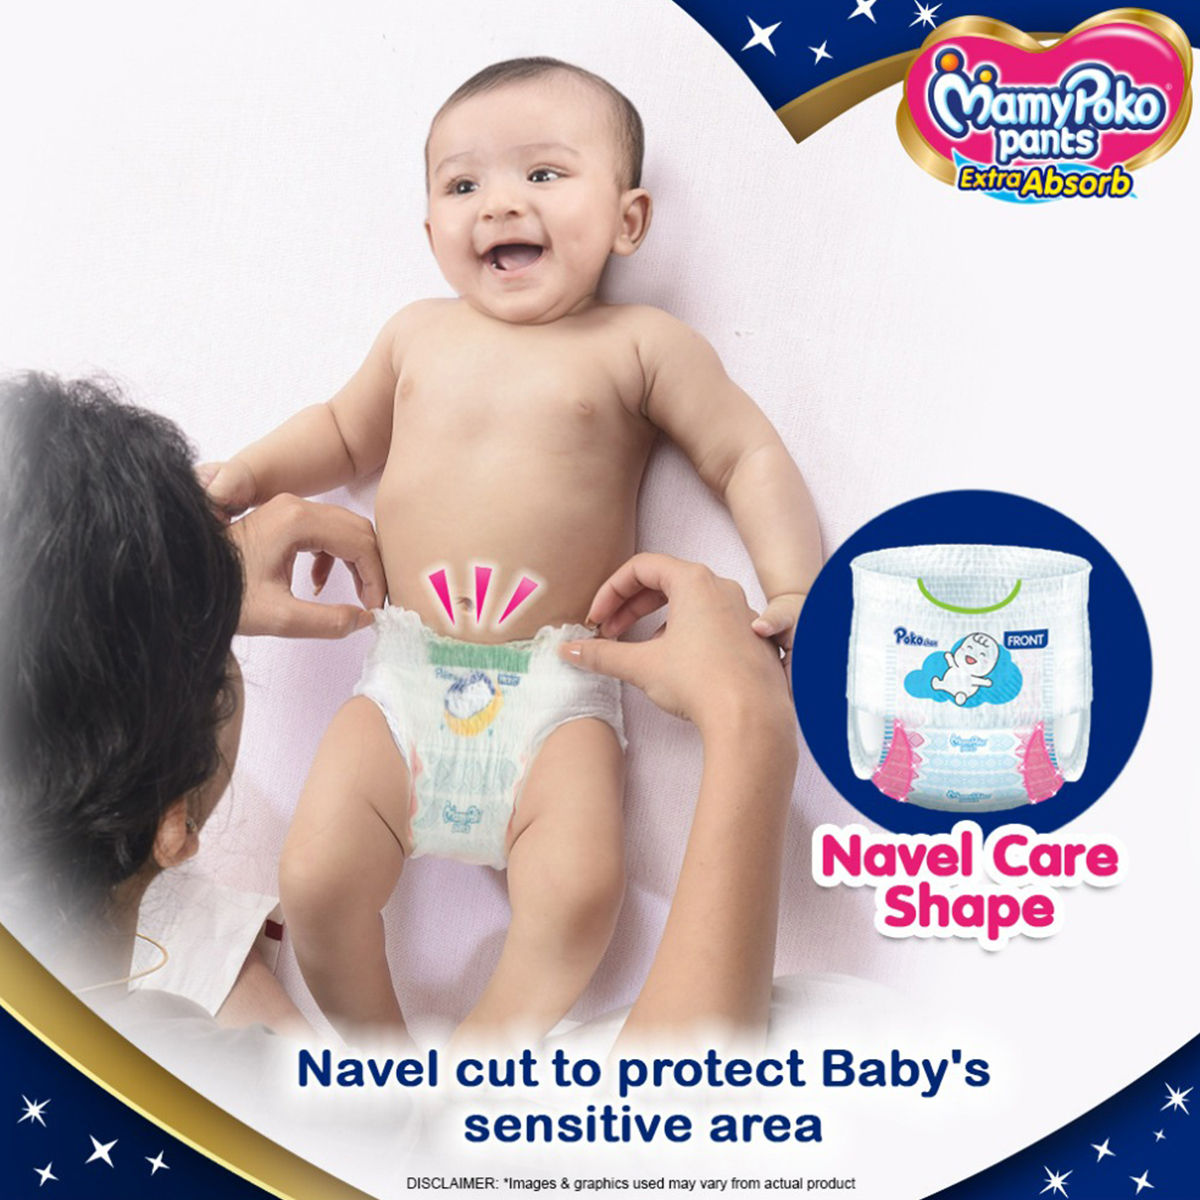 White Mamy Poko Pants Extra Absorb Diapers at Best Price in Aklera | Telecom